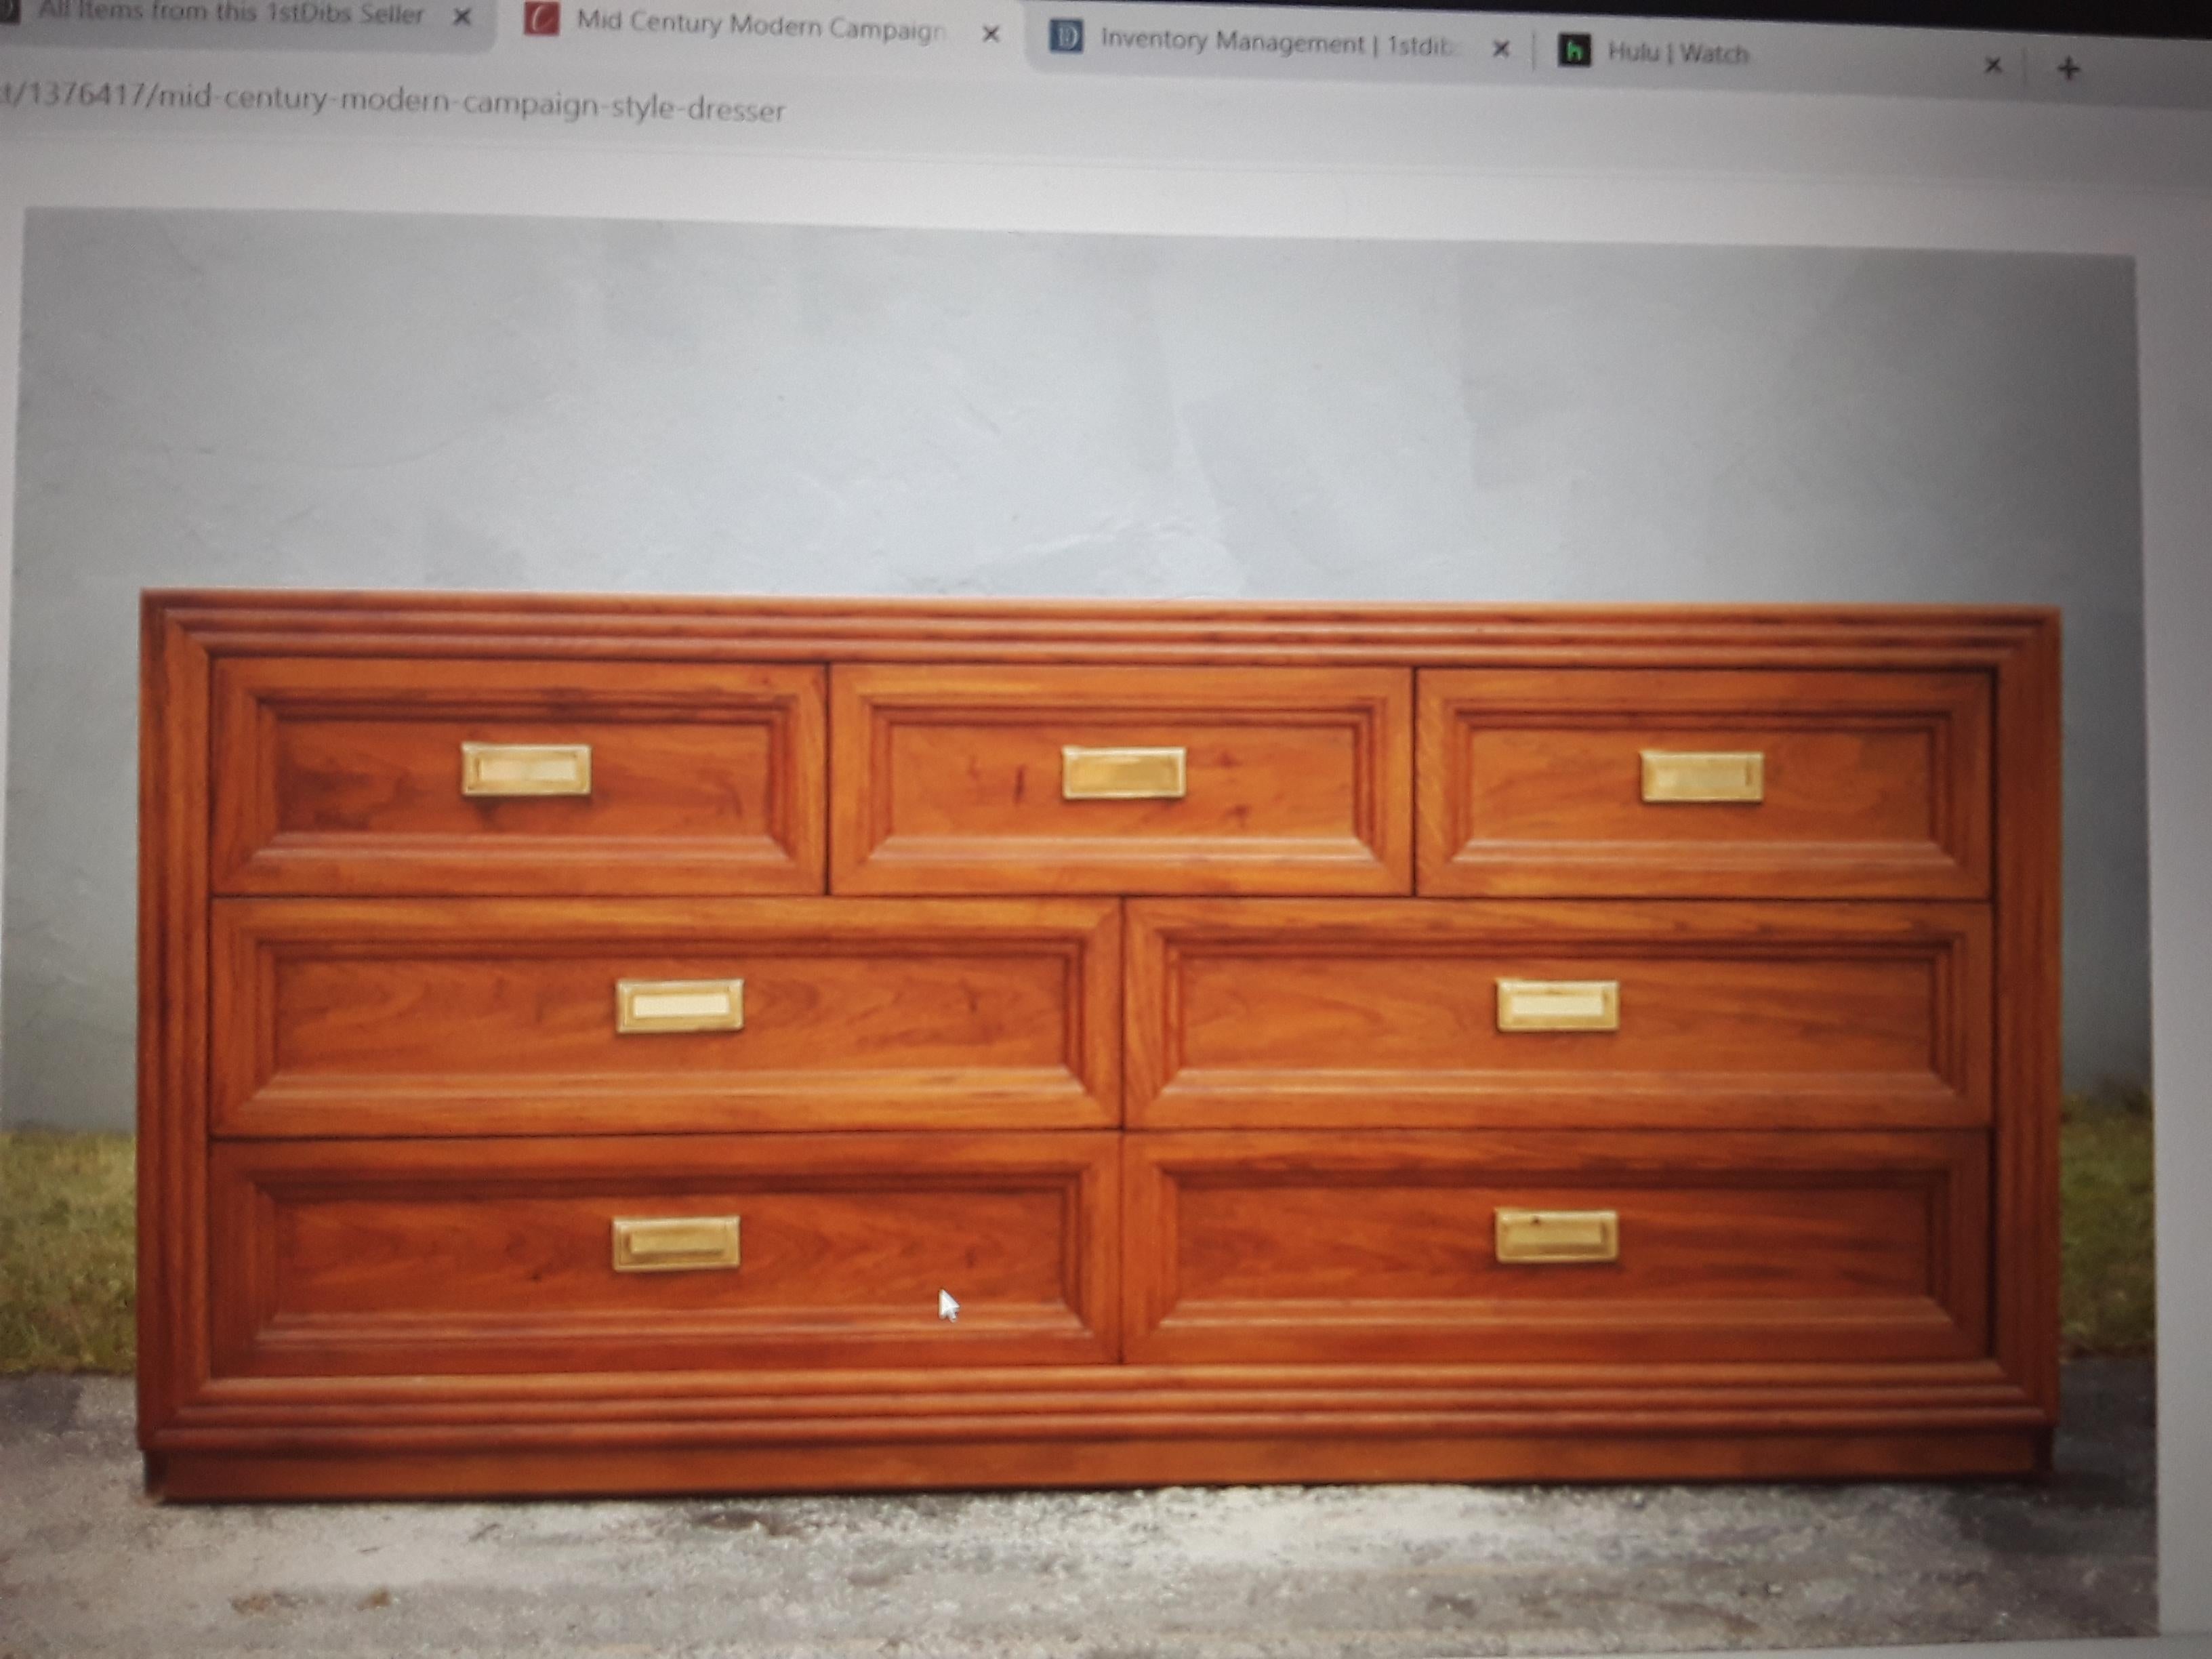 1970's Mid Century Modern Campaign style Dresser by Thomasville For Sale 1